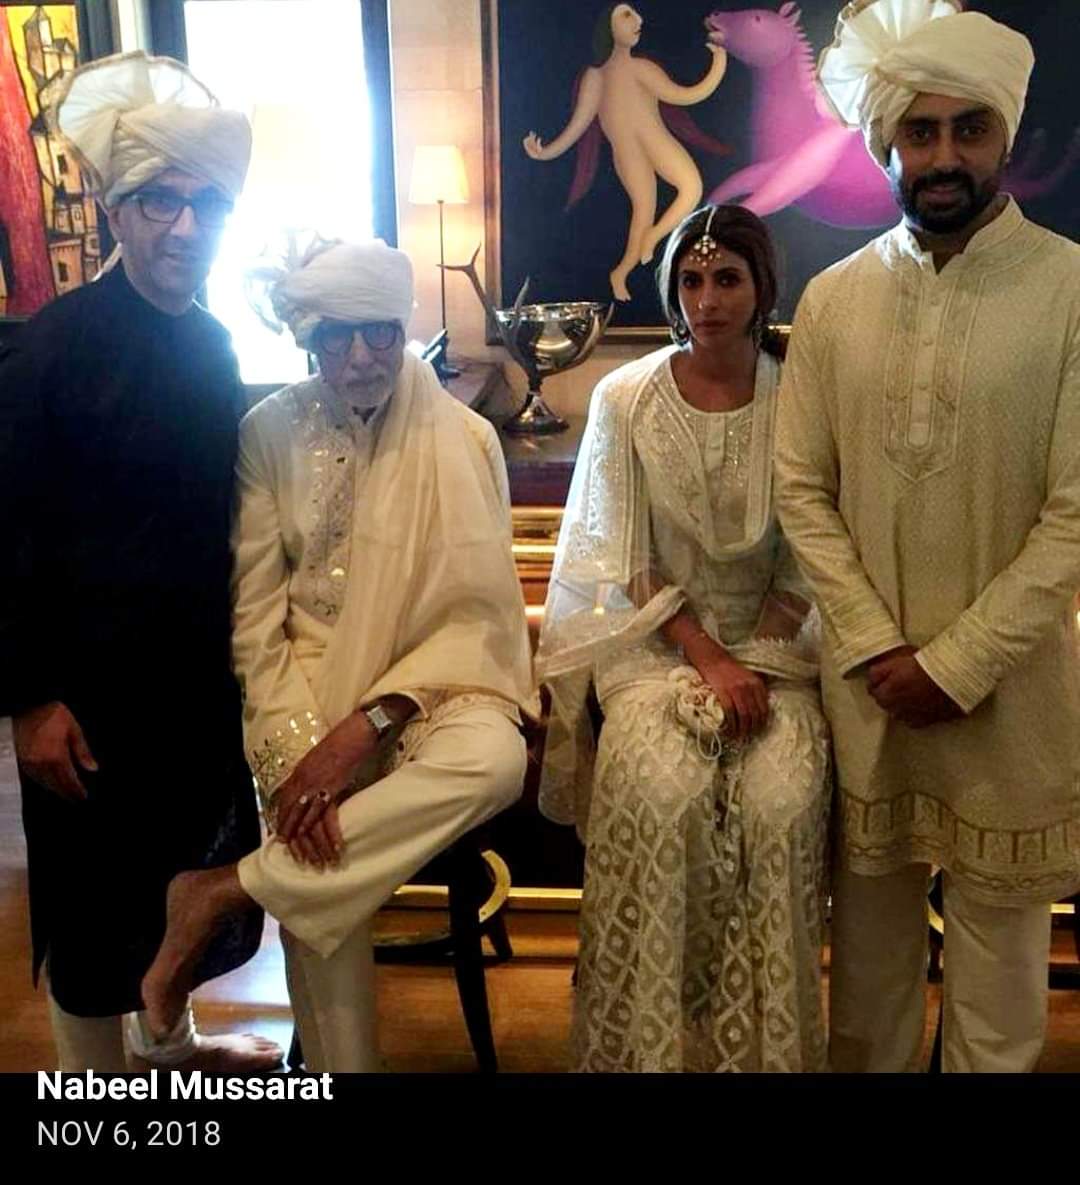  #Bollywood m0r0ns r the biggest traitors of India & IndiansBollywoodians with Annel Mussarat & Nabeel Mussarat Pakistani business brothers who have very close connection with ISI & Park armyIf these pictures to be believed, it seems every one from  #Bollywood is